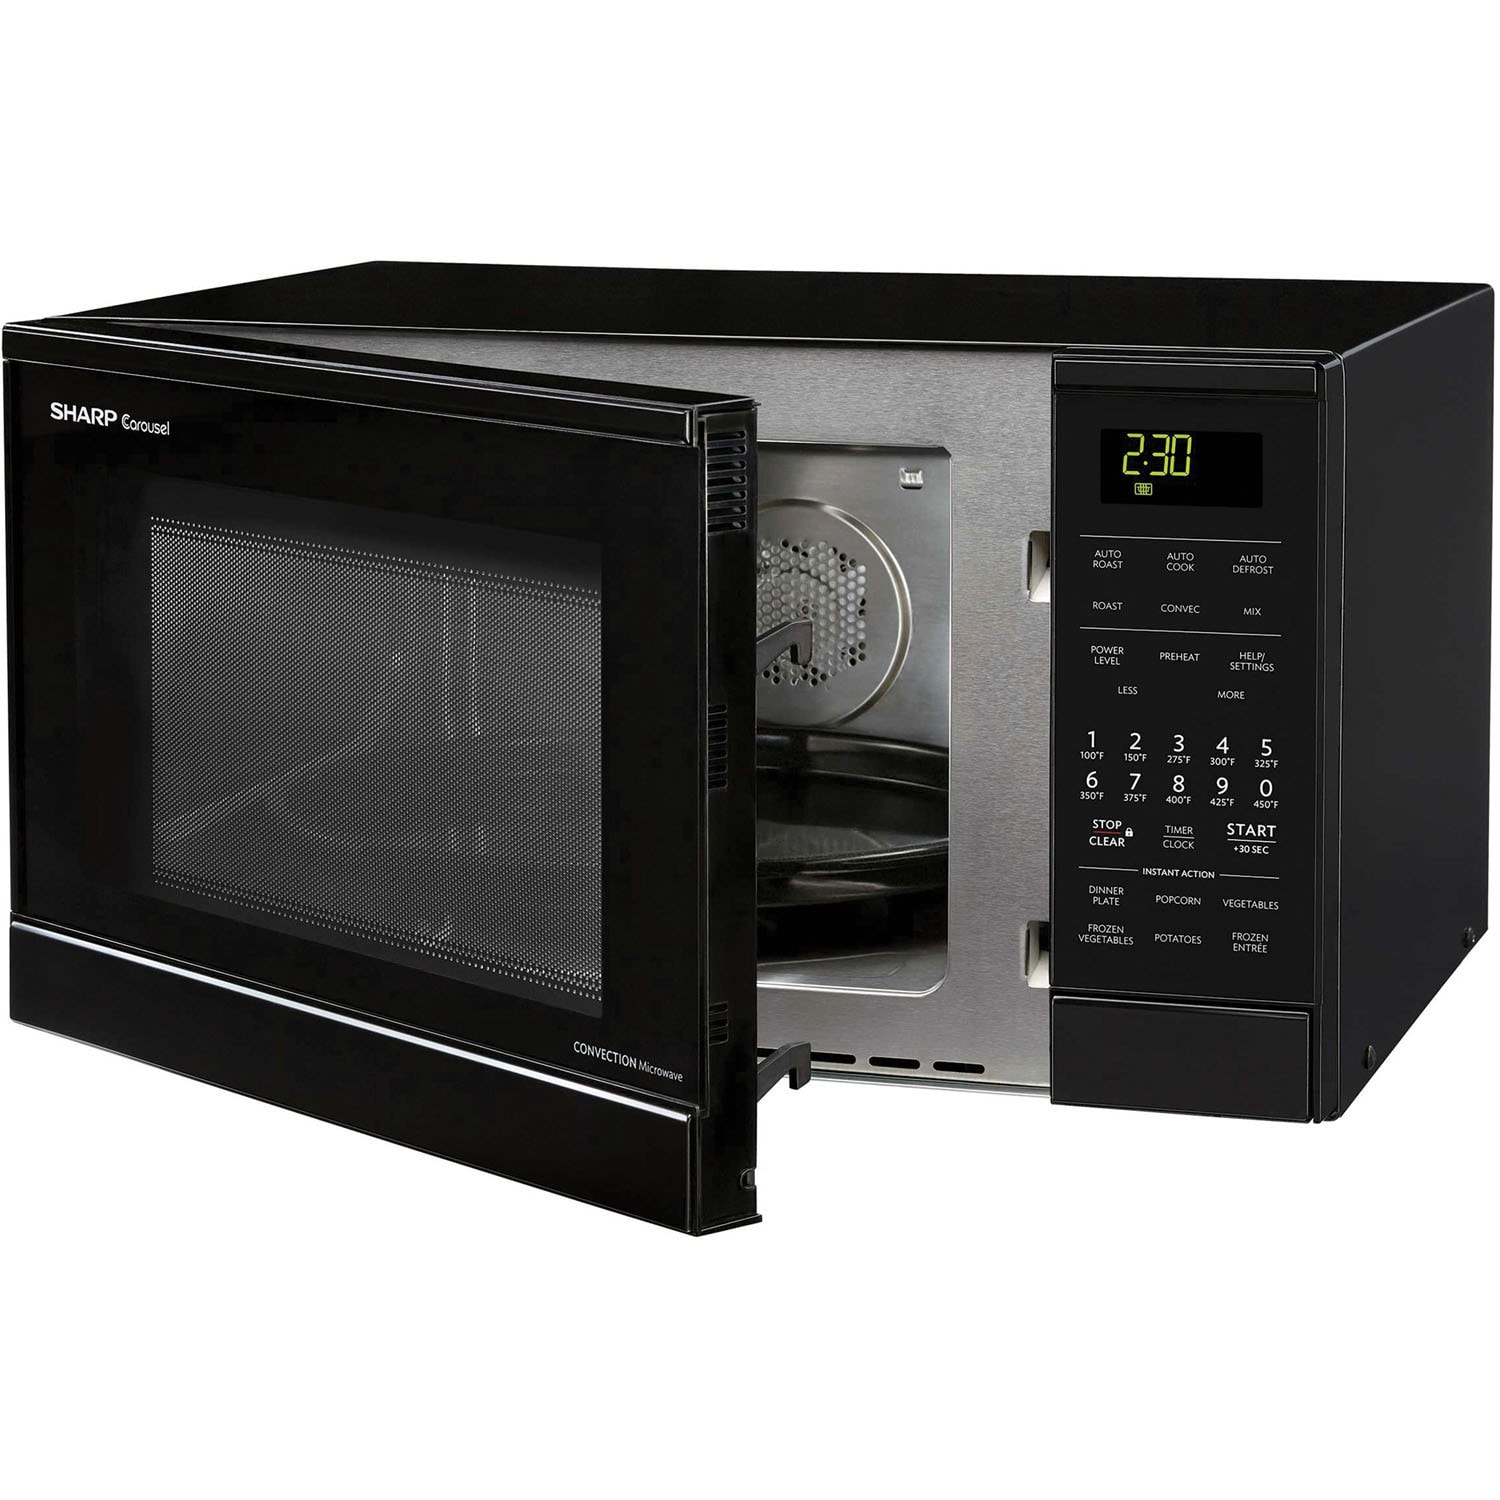 https://ak1.ostkcdn.com/images/products/12099094/Sharp-Carousel-0.9-Cu.-Ft.-900W-Countertop-Convection-Microwave-Oven-with-Stainless-Steel-Interior-Black-17d80cd6-4e83-4d49-8d2e-37116706f326.jpg